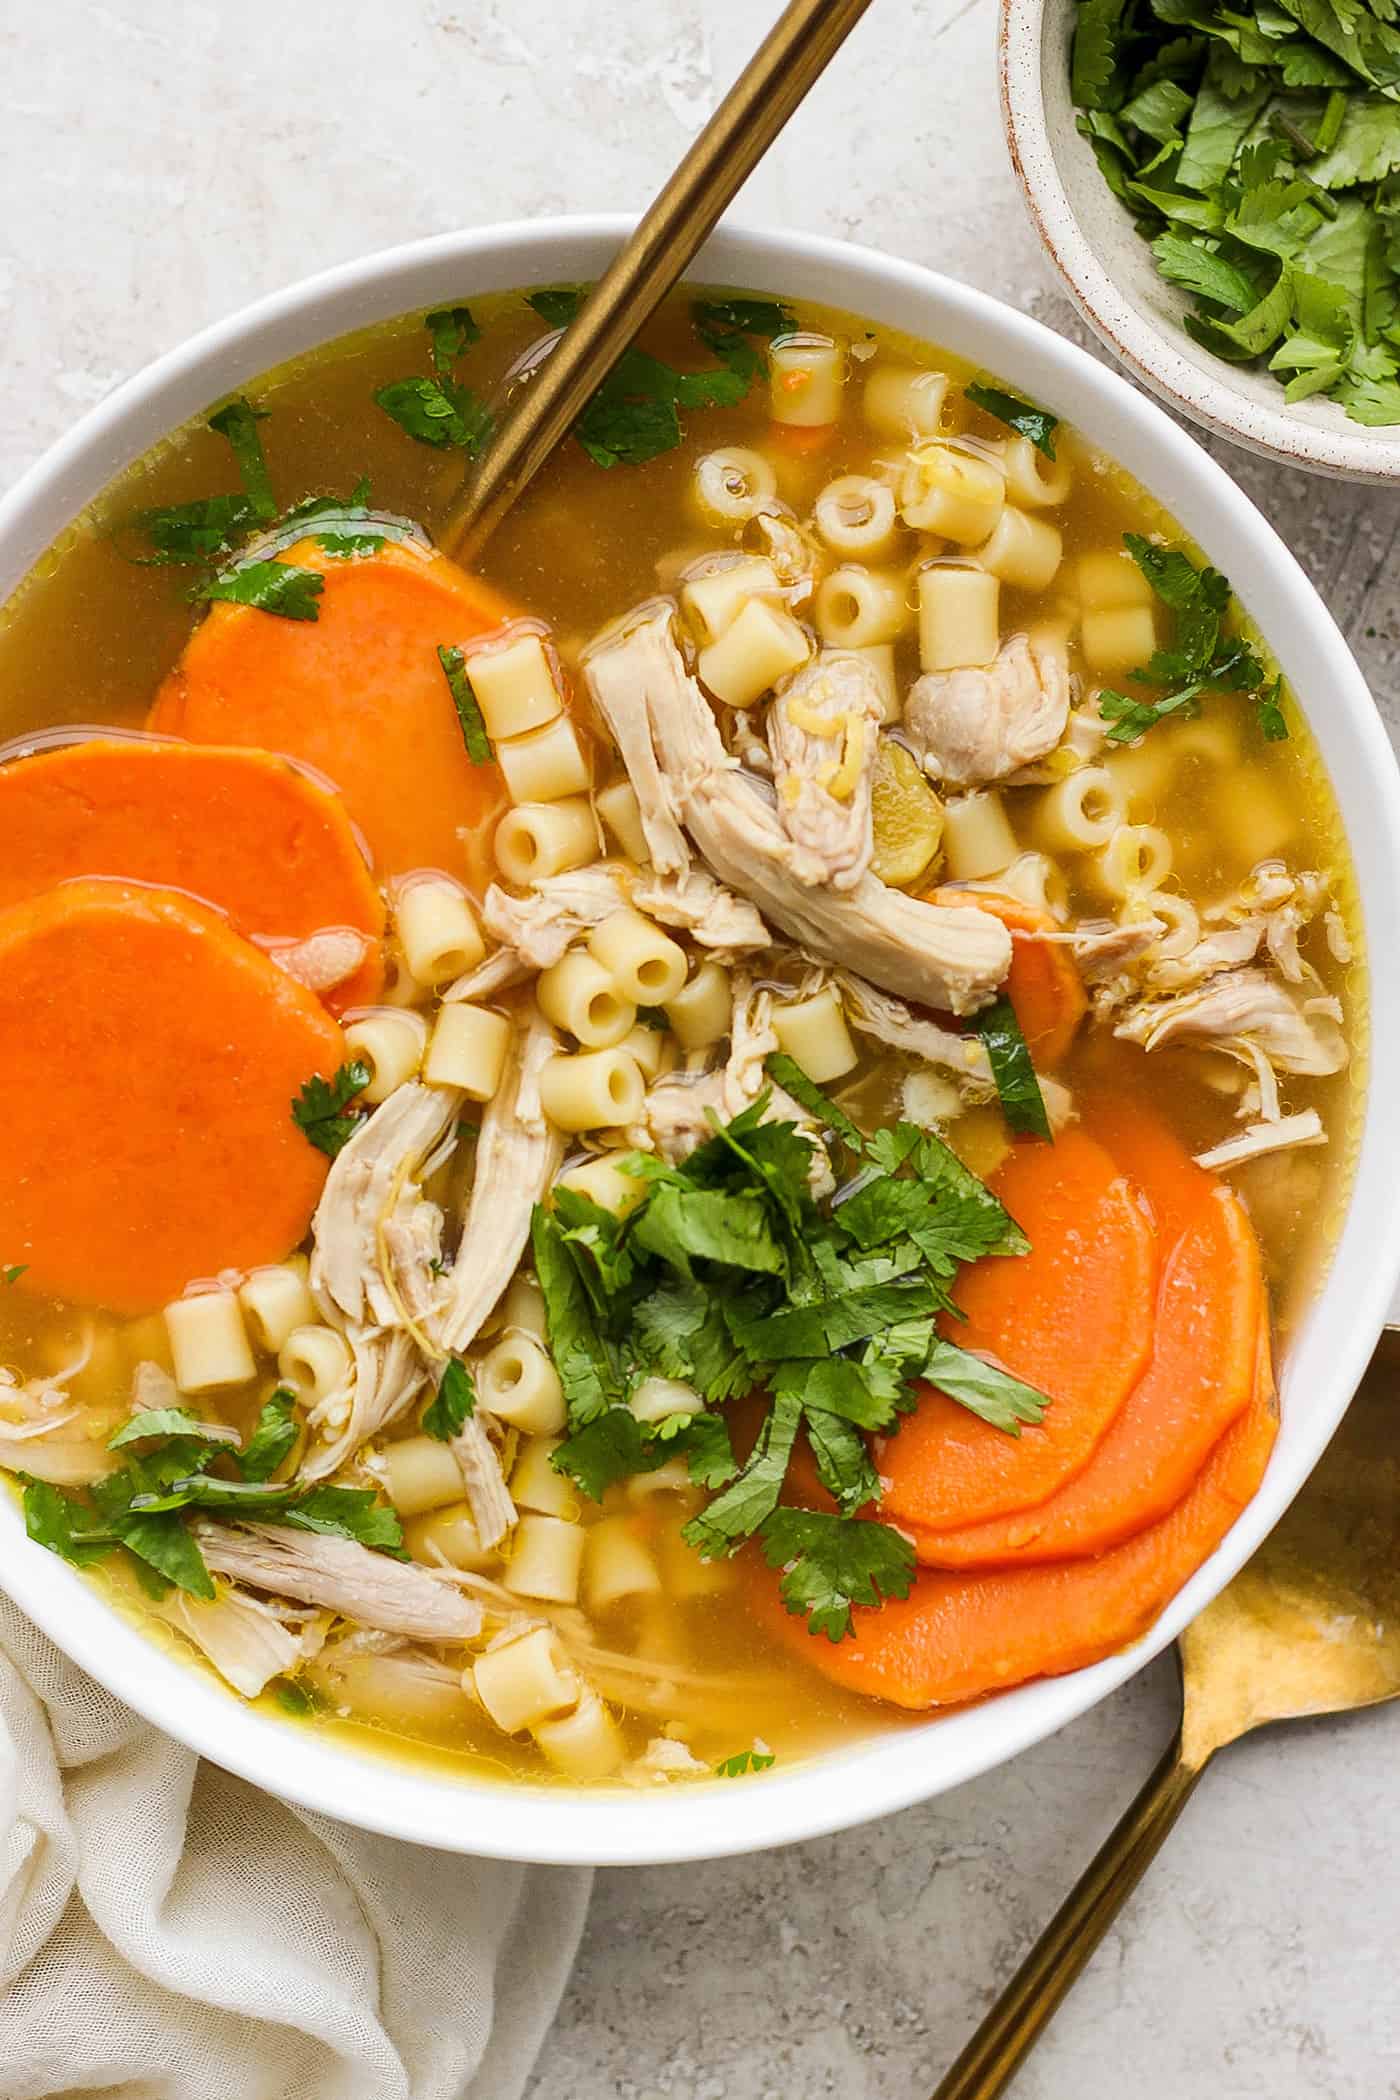 A hearty bowl of ginger chicken soup showing shredded chicken, sliced sweet potatoes, and pasta.